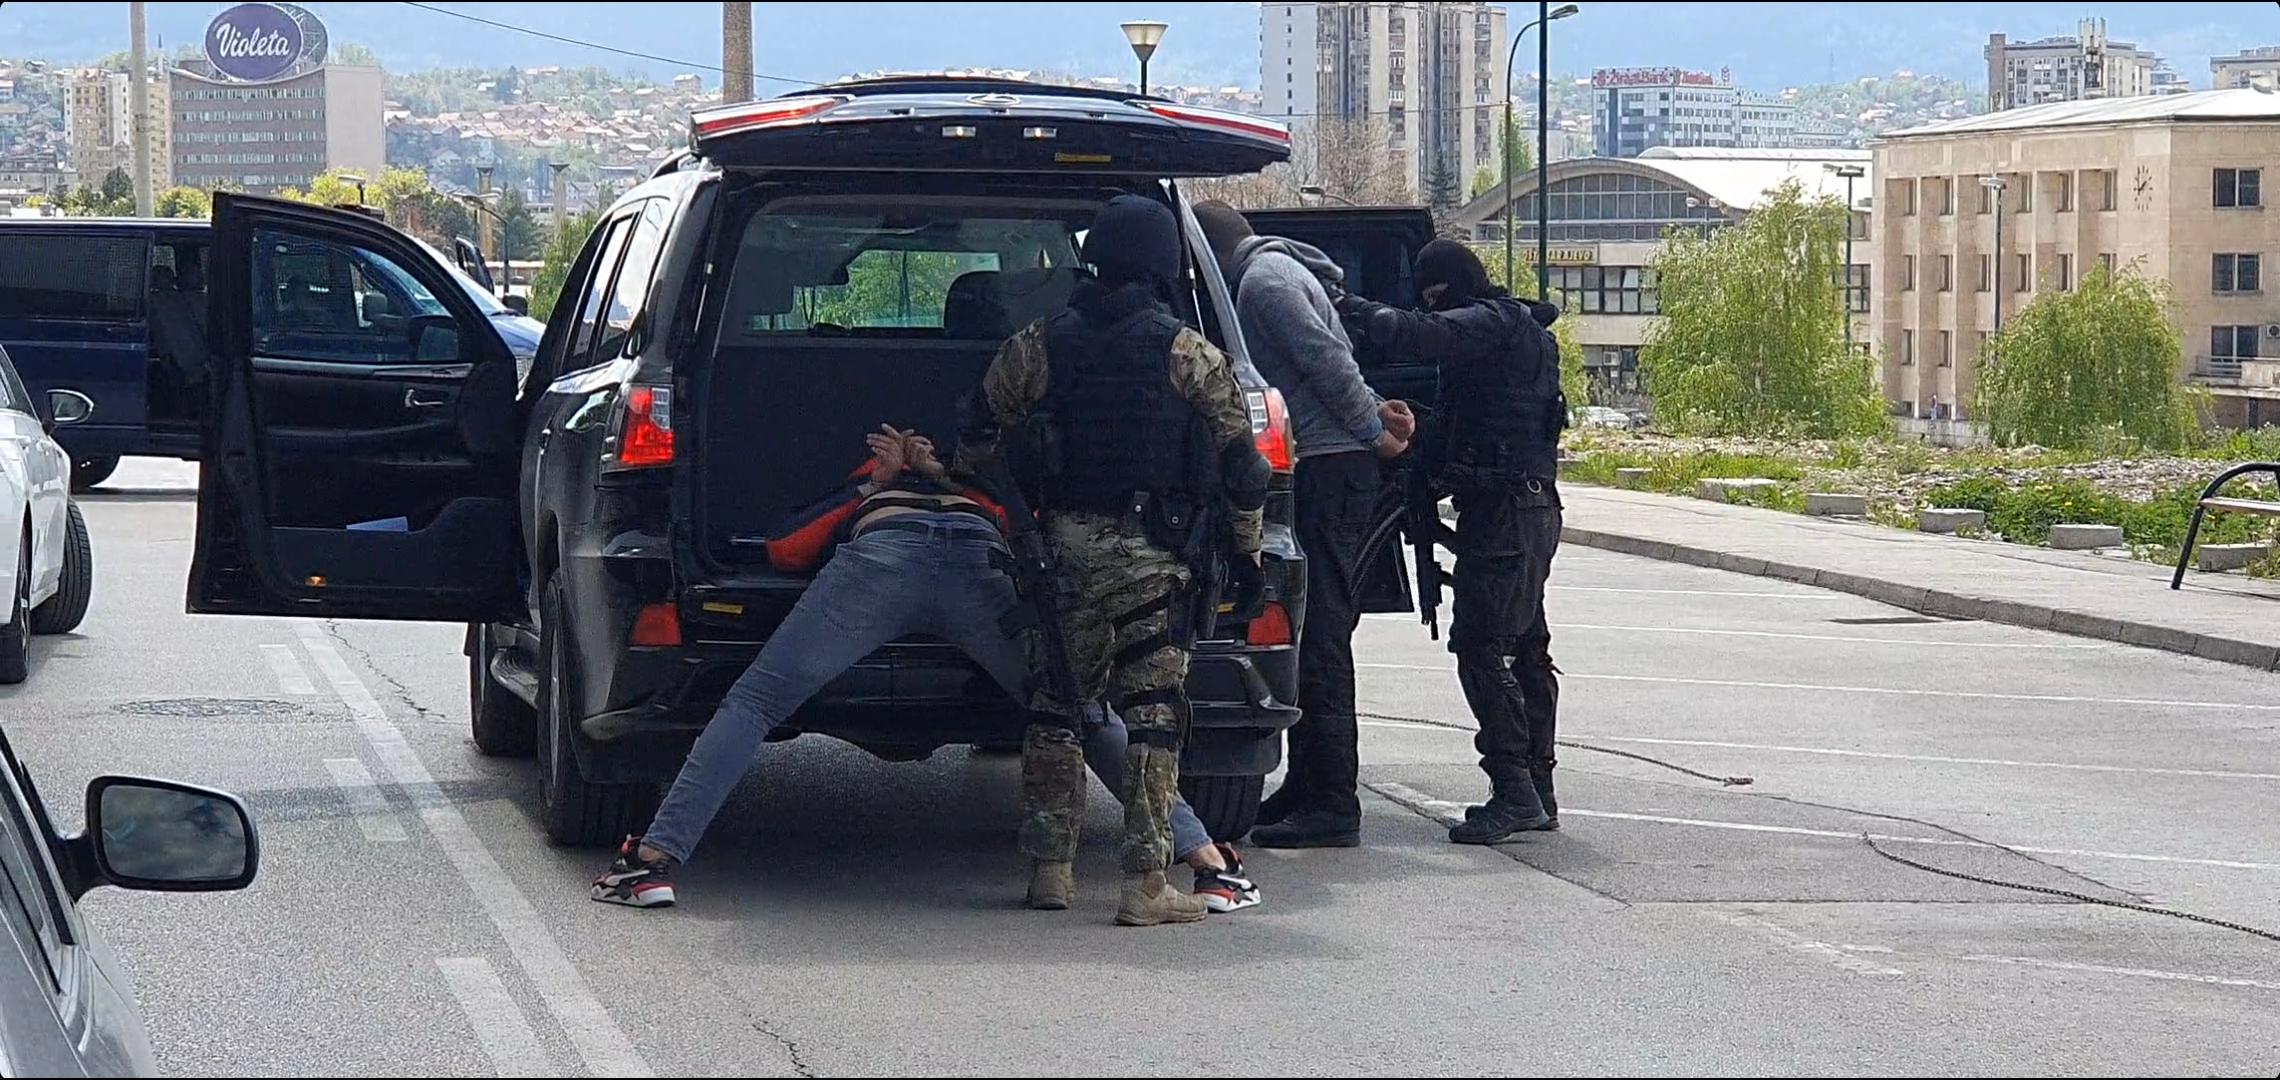 Arrest in front of "Avaz Twist Tower" - Avaz